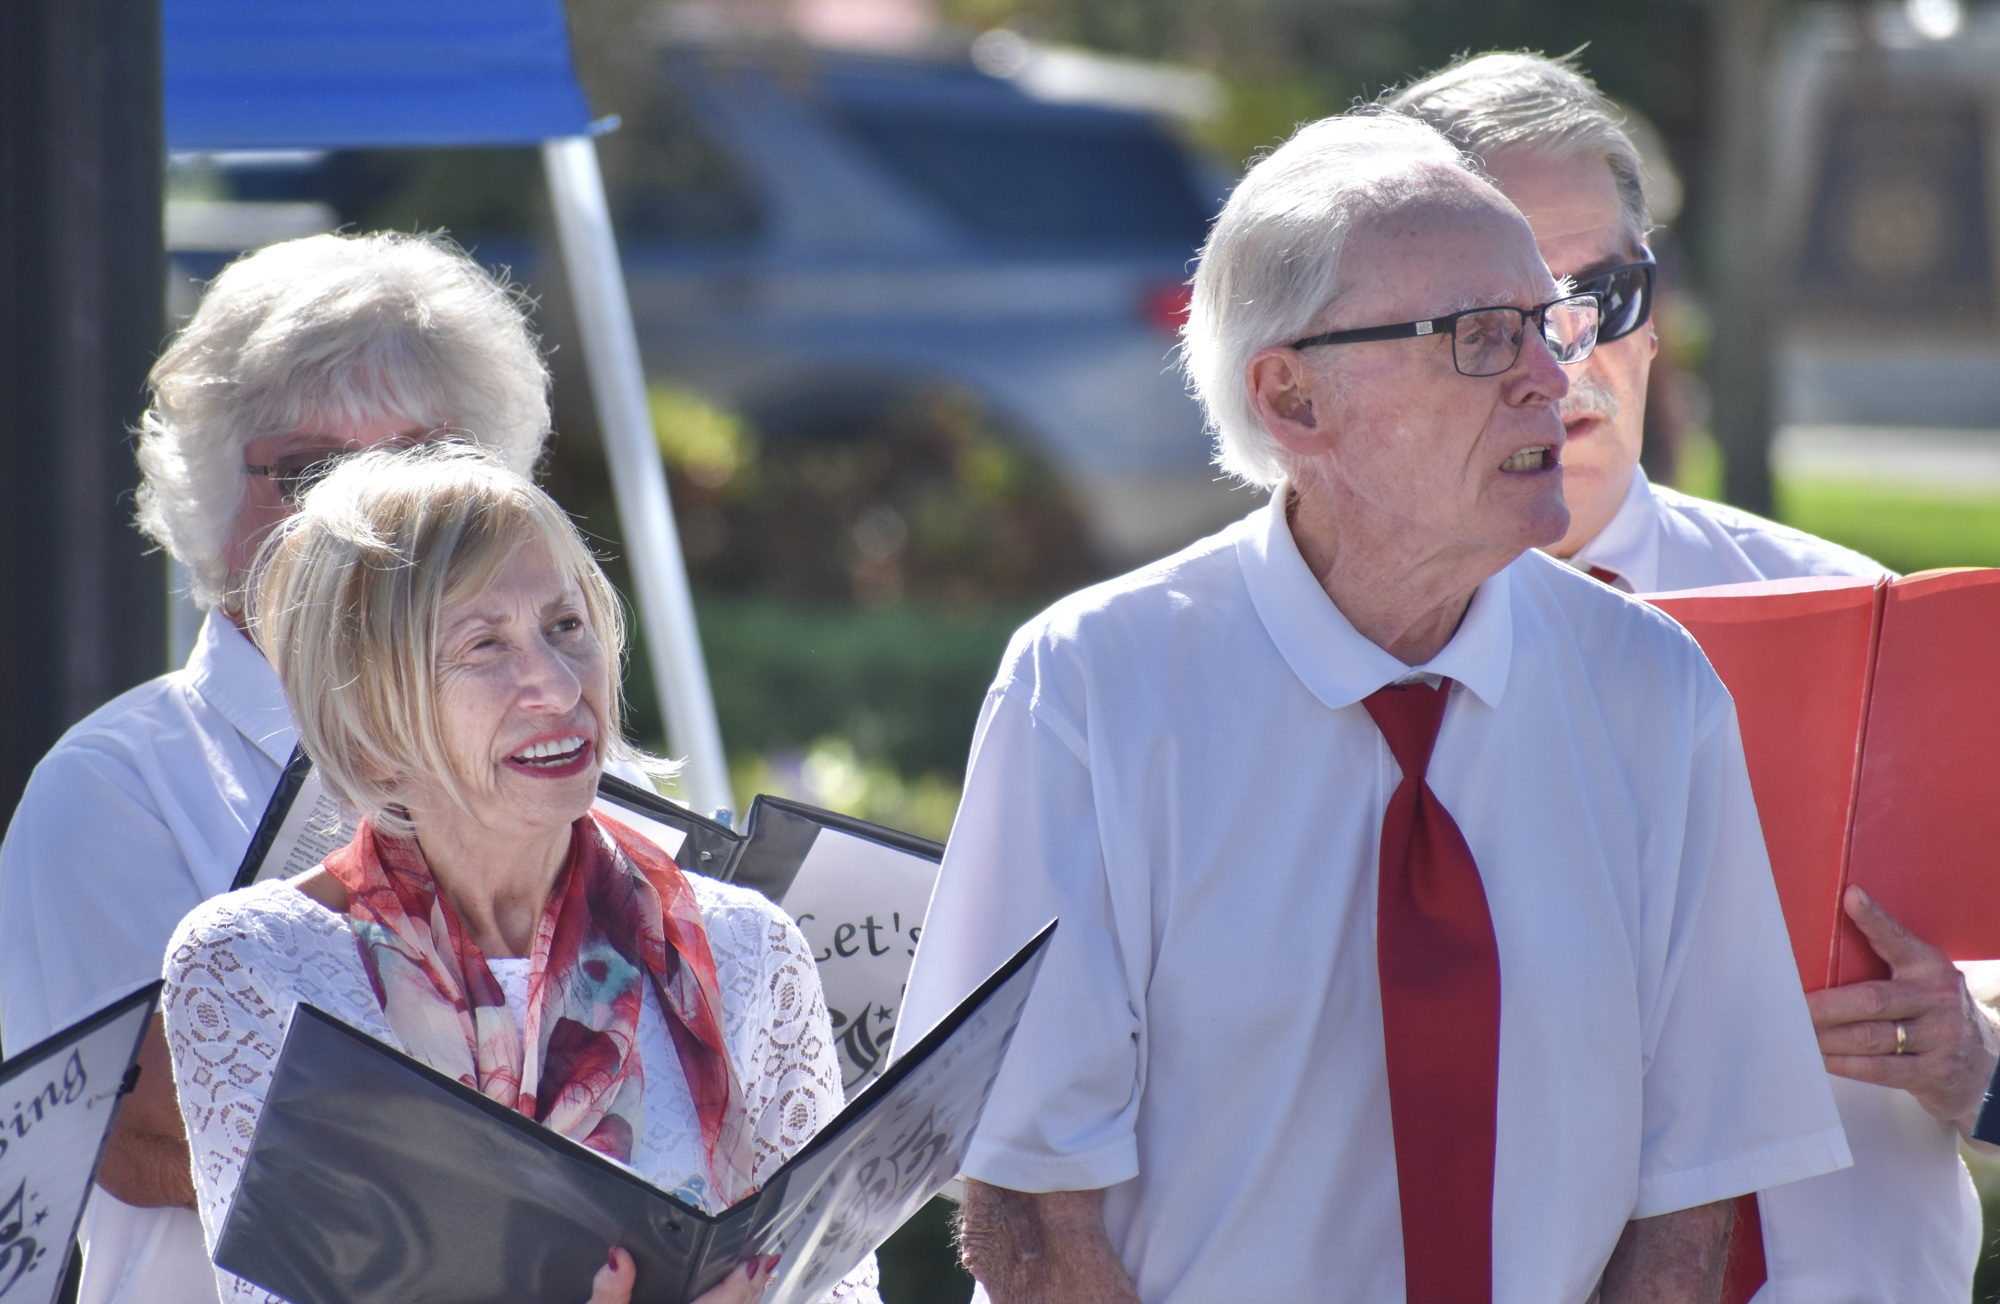 Let's Sing members, Del Webb's Ivy Ruark and Jerry Scoville, sing God Bless America. (Photo by Ian Swaby)